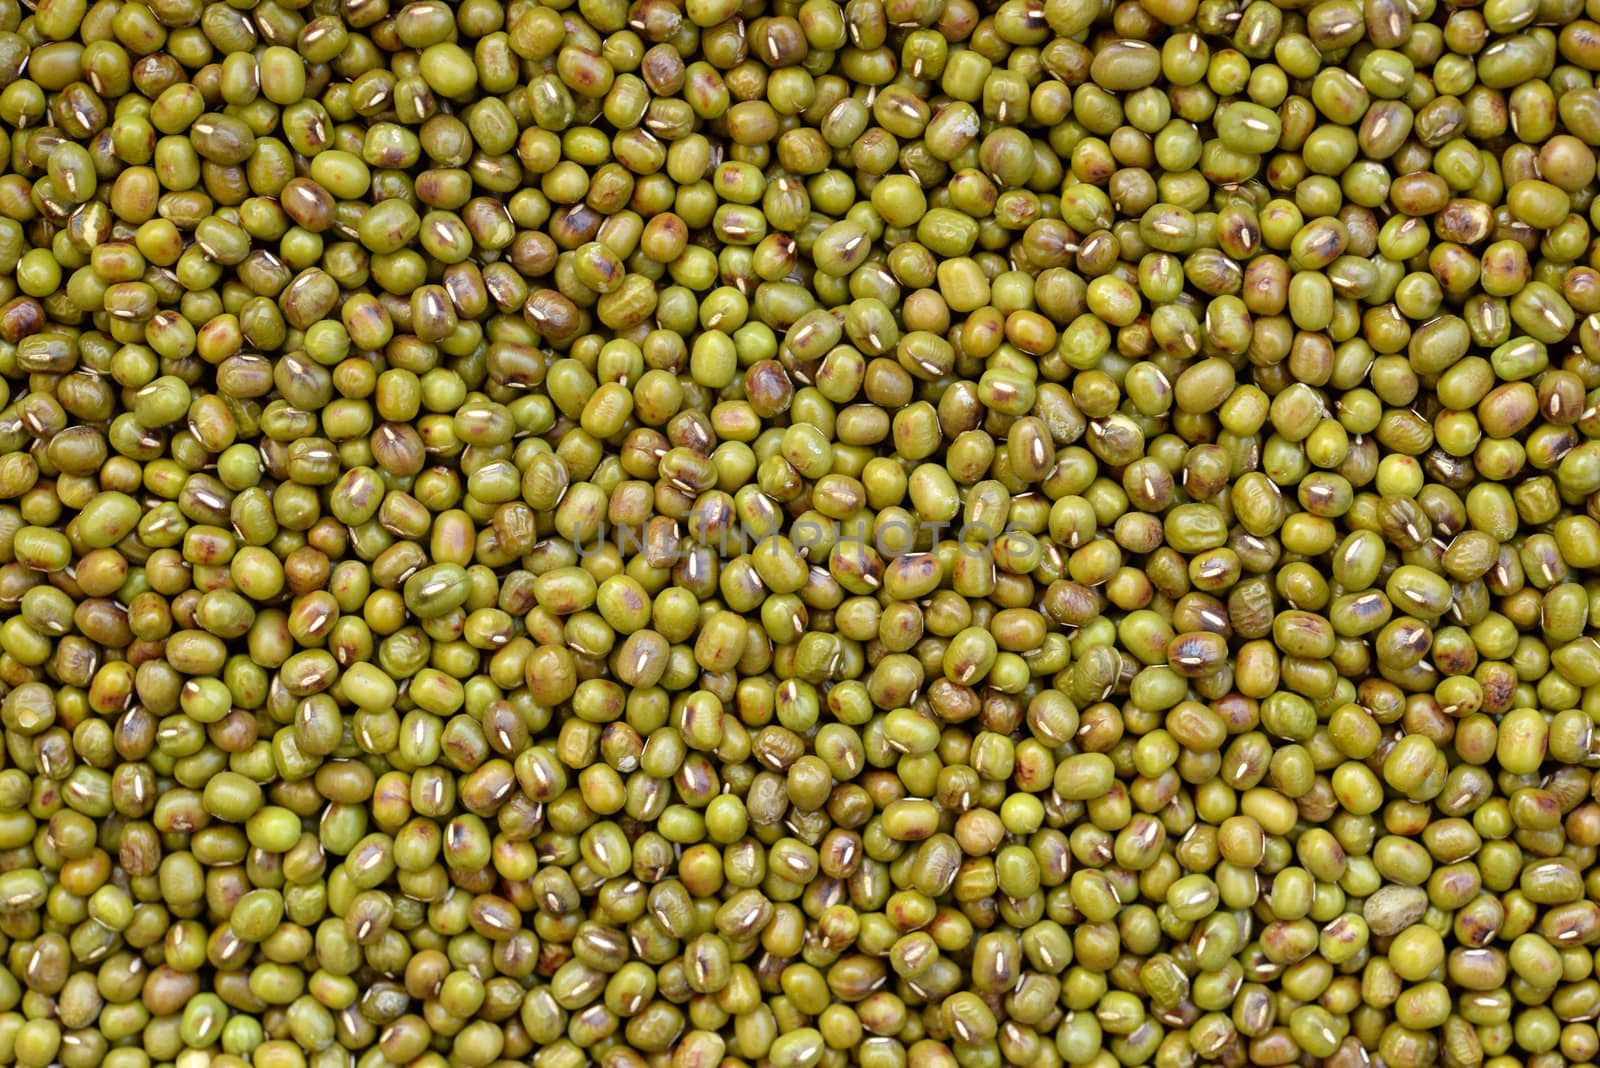 Background image of mung beans that have been roasted by heat. by hellogiant